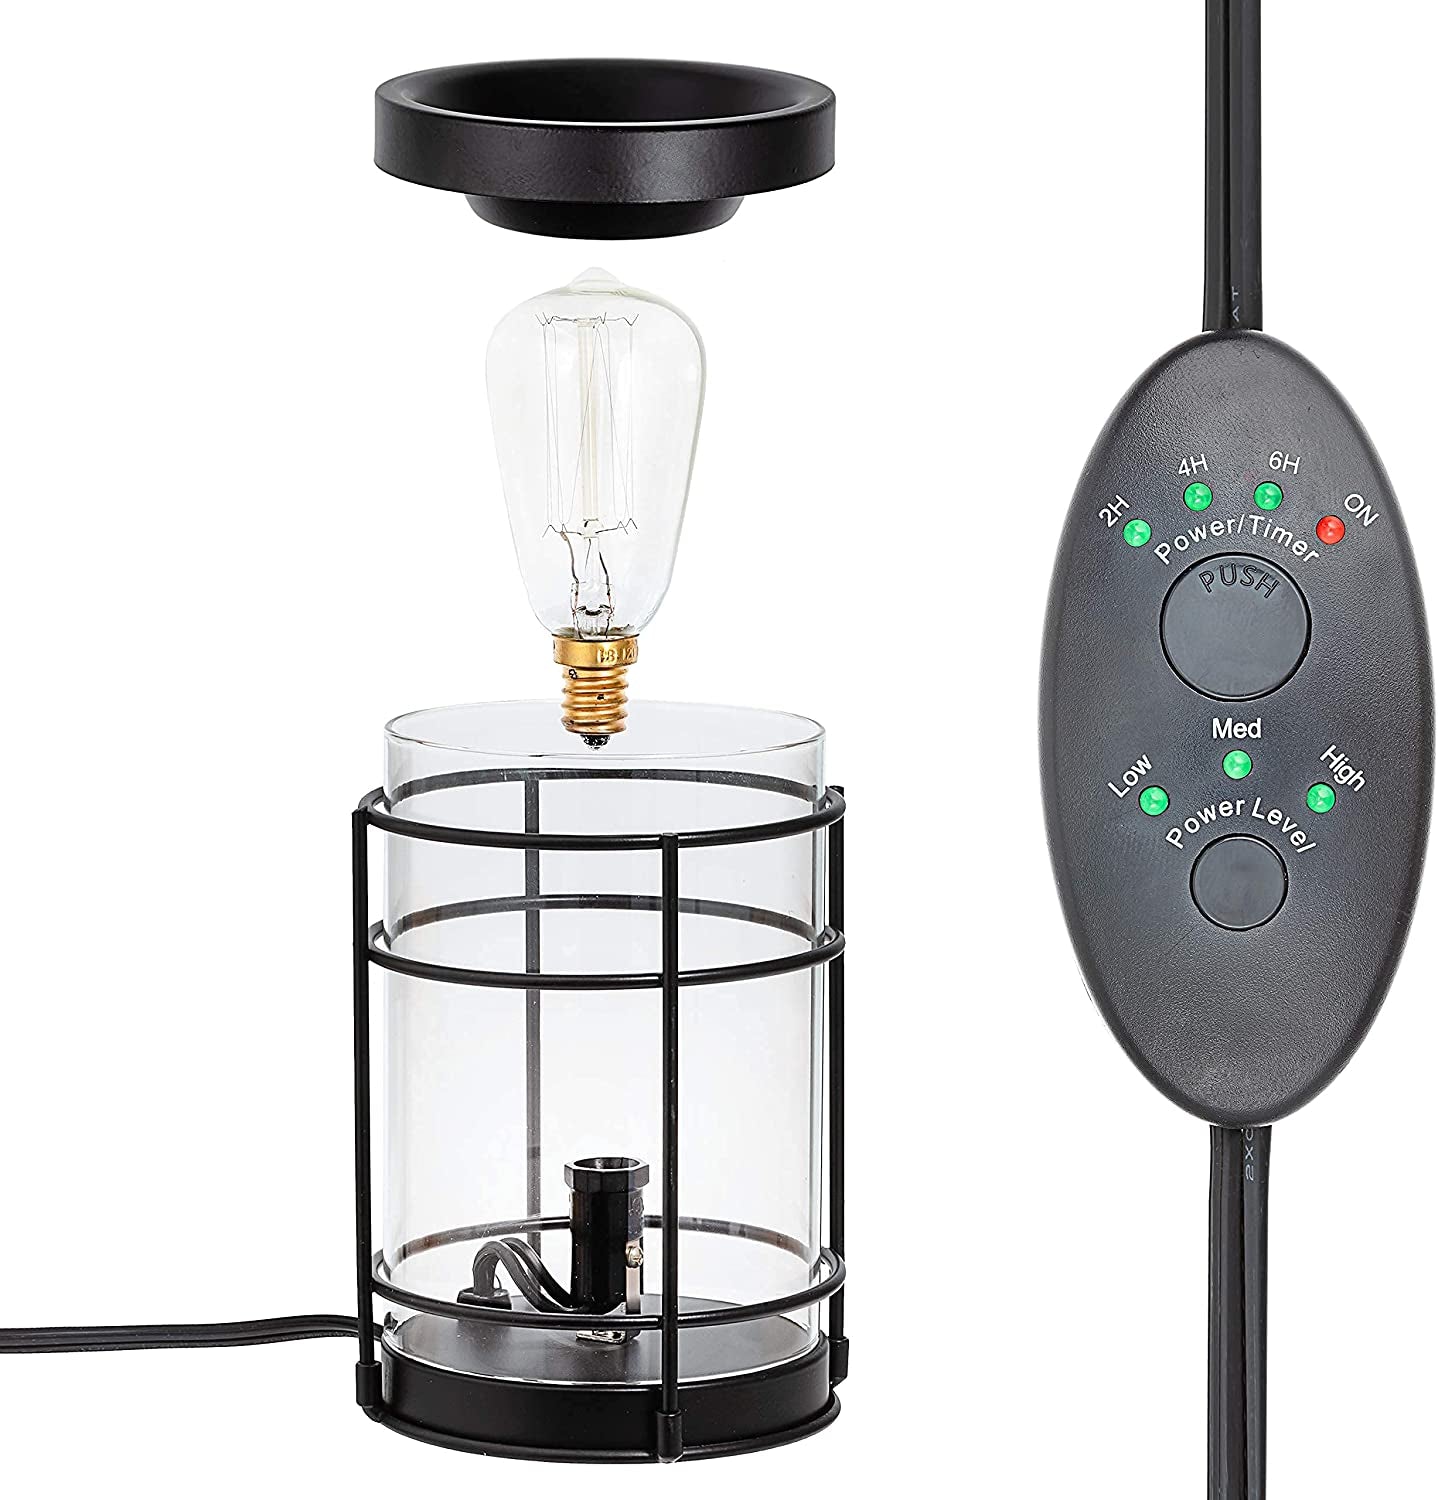 Vintage Bulb Electric Candle Warmer with Timer | Black Plug in Fragrance Warmer for Scented Wax Melts, Cubes, Tarts | Air Freshener Set for Rustic Home Décor, Office, Gifts